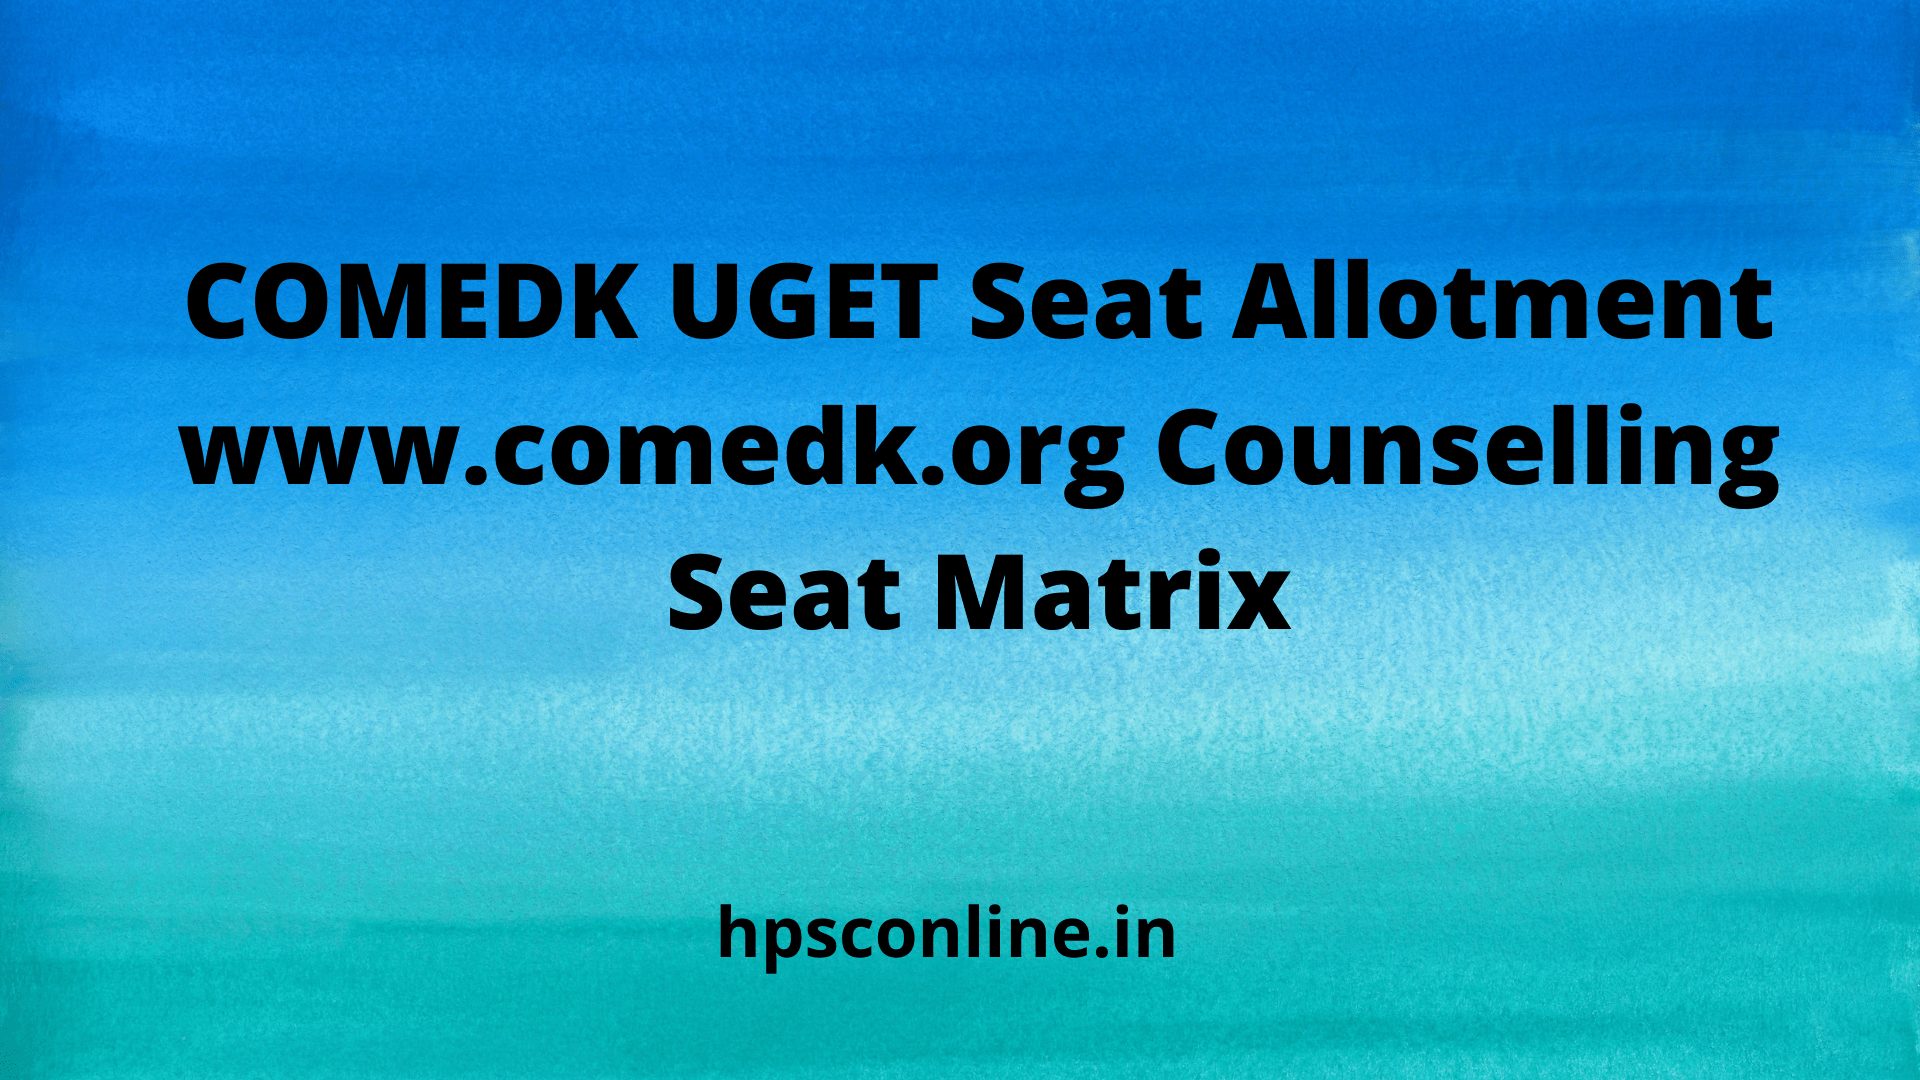 COMEDK UGET Seat Allotment 2021 www.comedk.org Counselling Seat Matrix